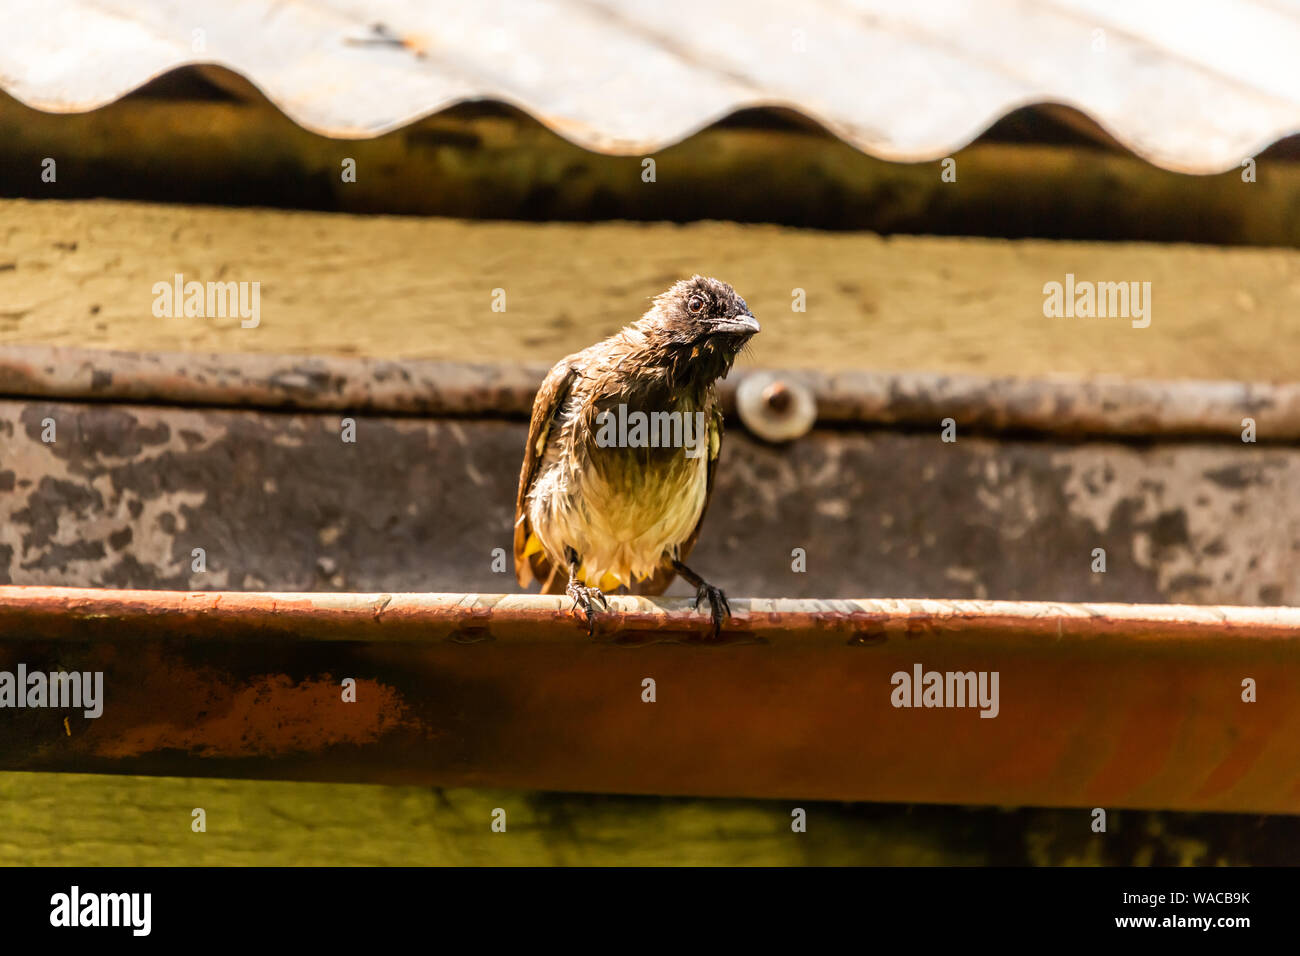 Colour wildlife photograph of wet common Bulbul bird perched on guttering after enjoying its bird bath looking at camera, taken in Kenya. Stock Photo